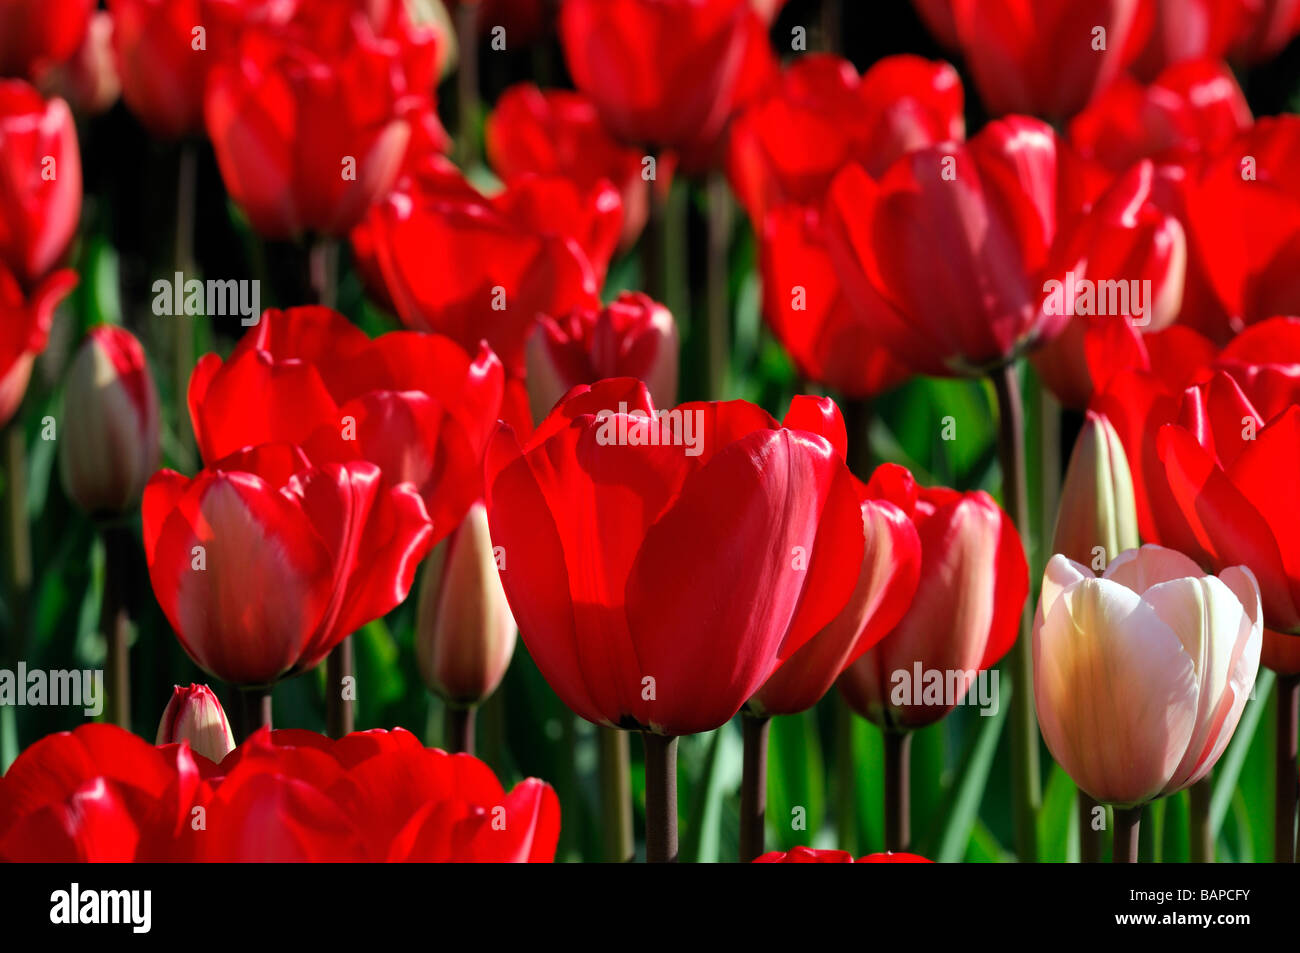 red tulip tulipa red impression darwin hybrid group flower bloom blossom species variant var sp variety color colour Stock Photo